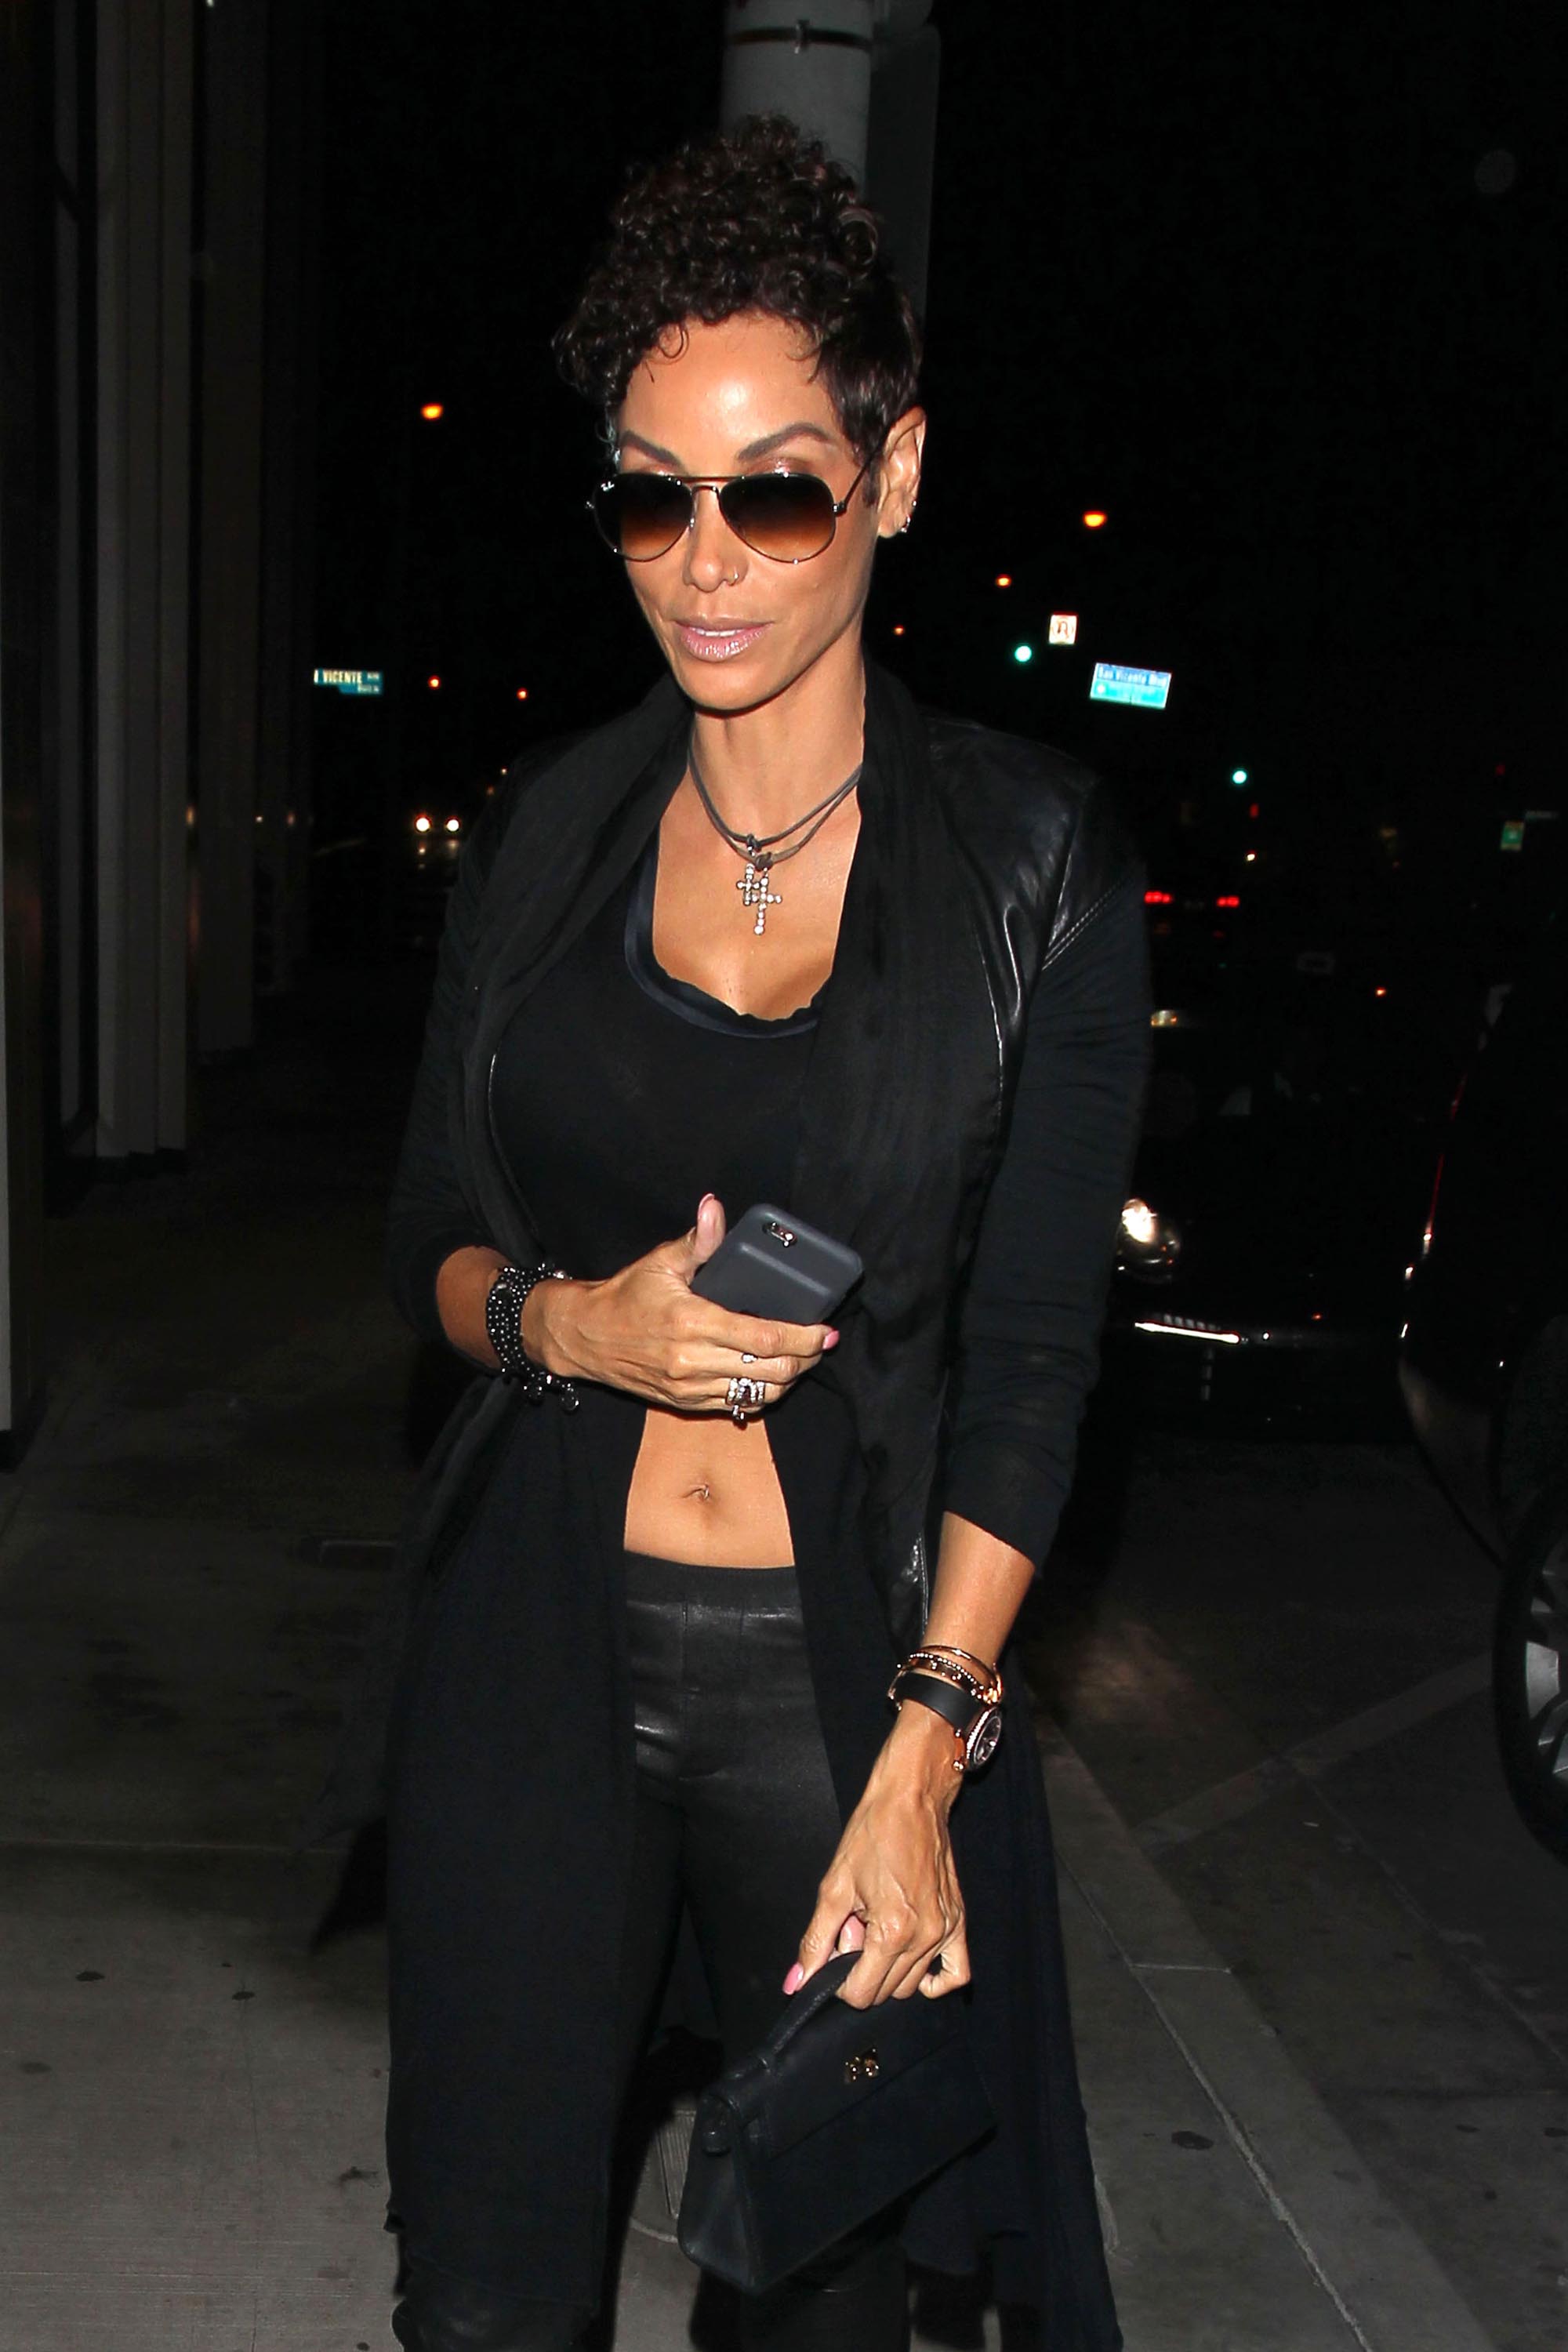 Nicole Murphy out in West Hollywood